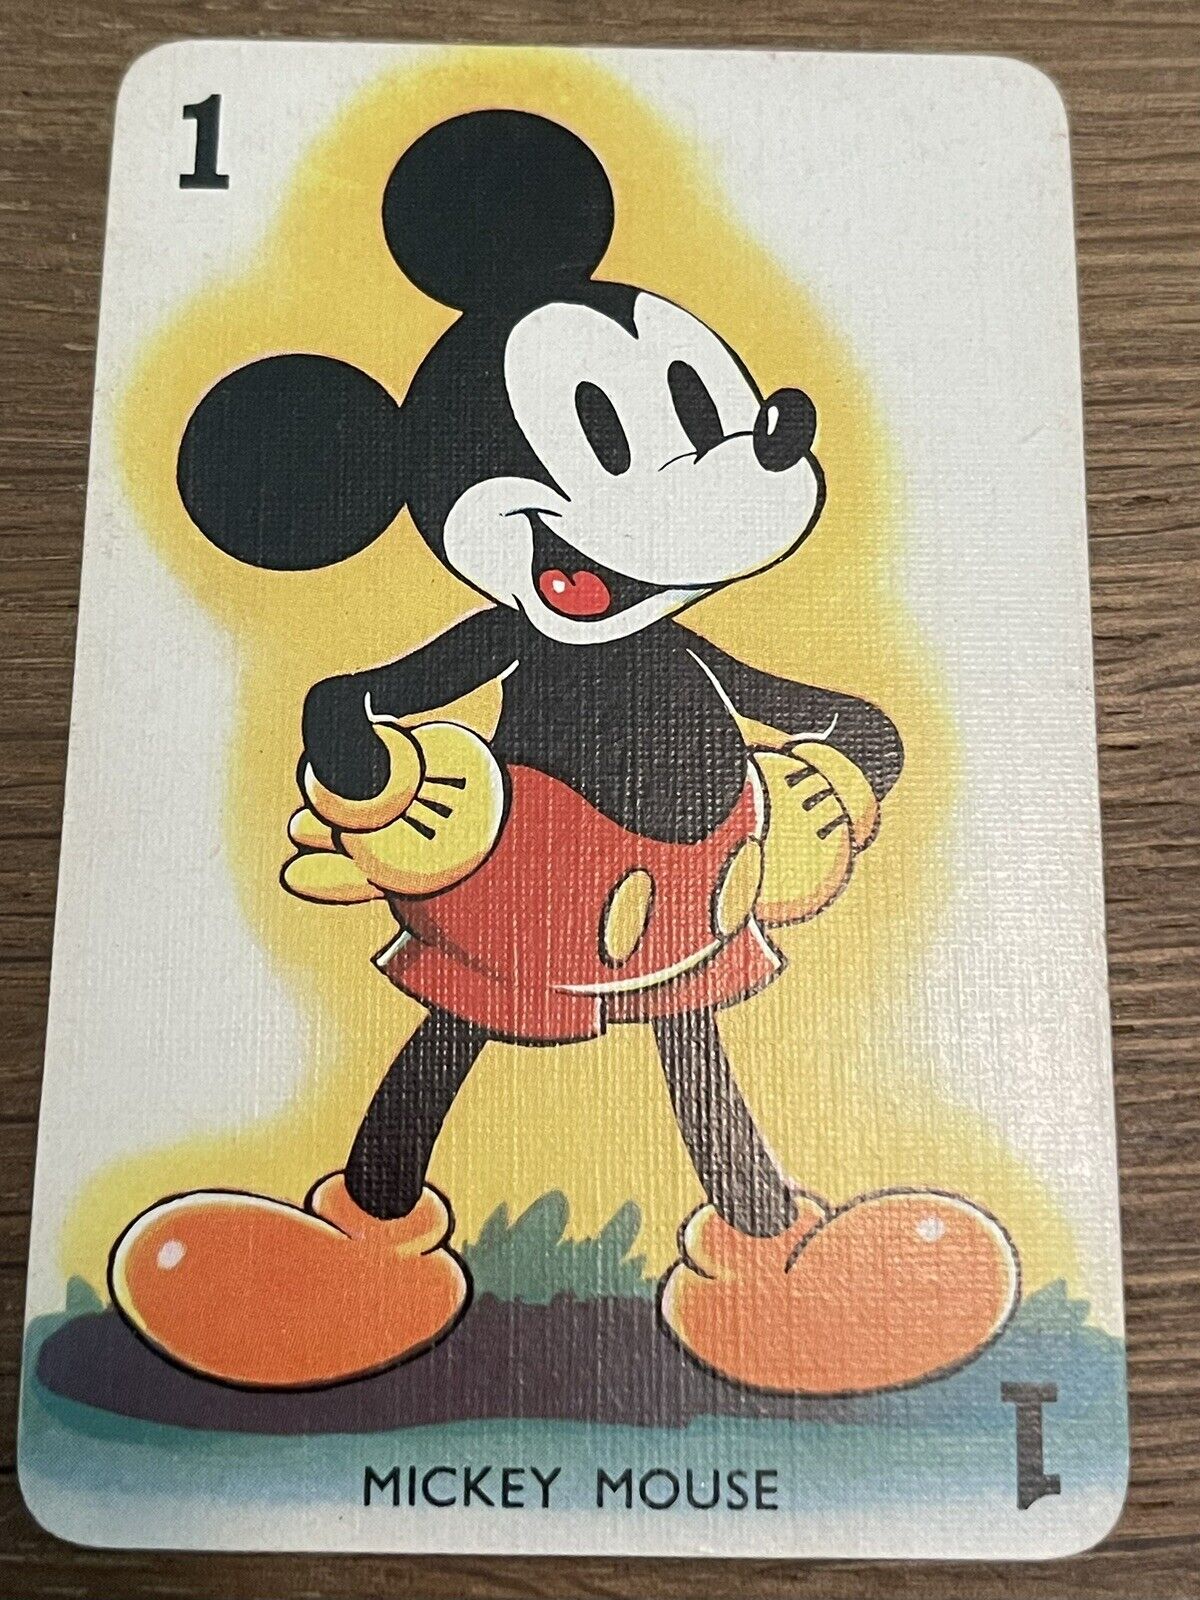 VINTAGE 1938 CASTELL MICKEY MOUSE SHUFFLED SYMPHONIES CARD NM-MINT+ AMAZING